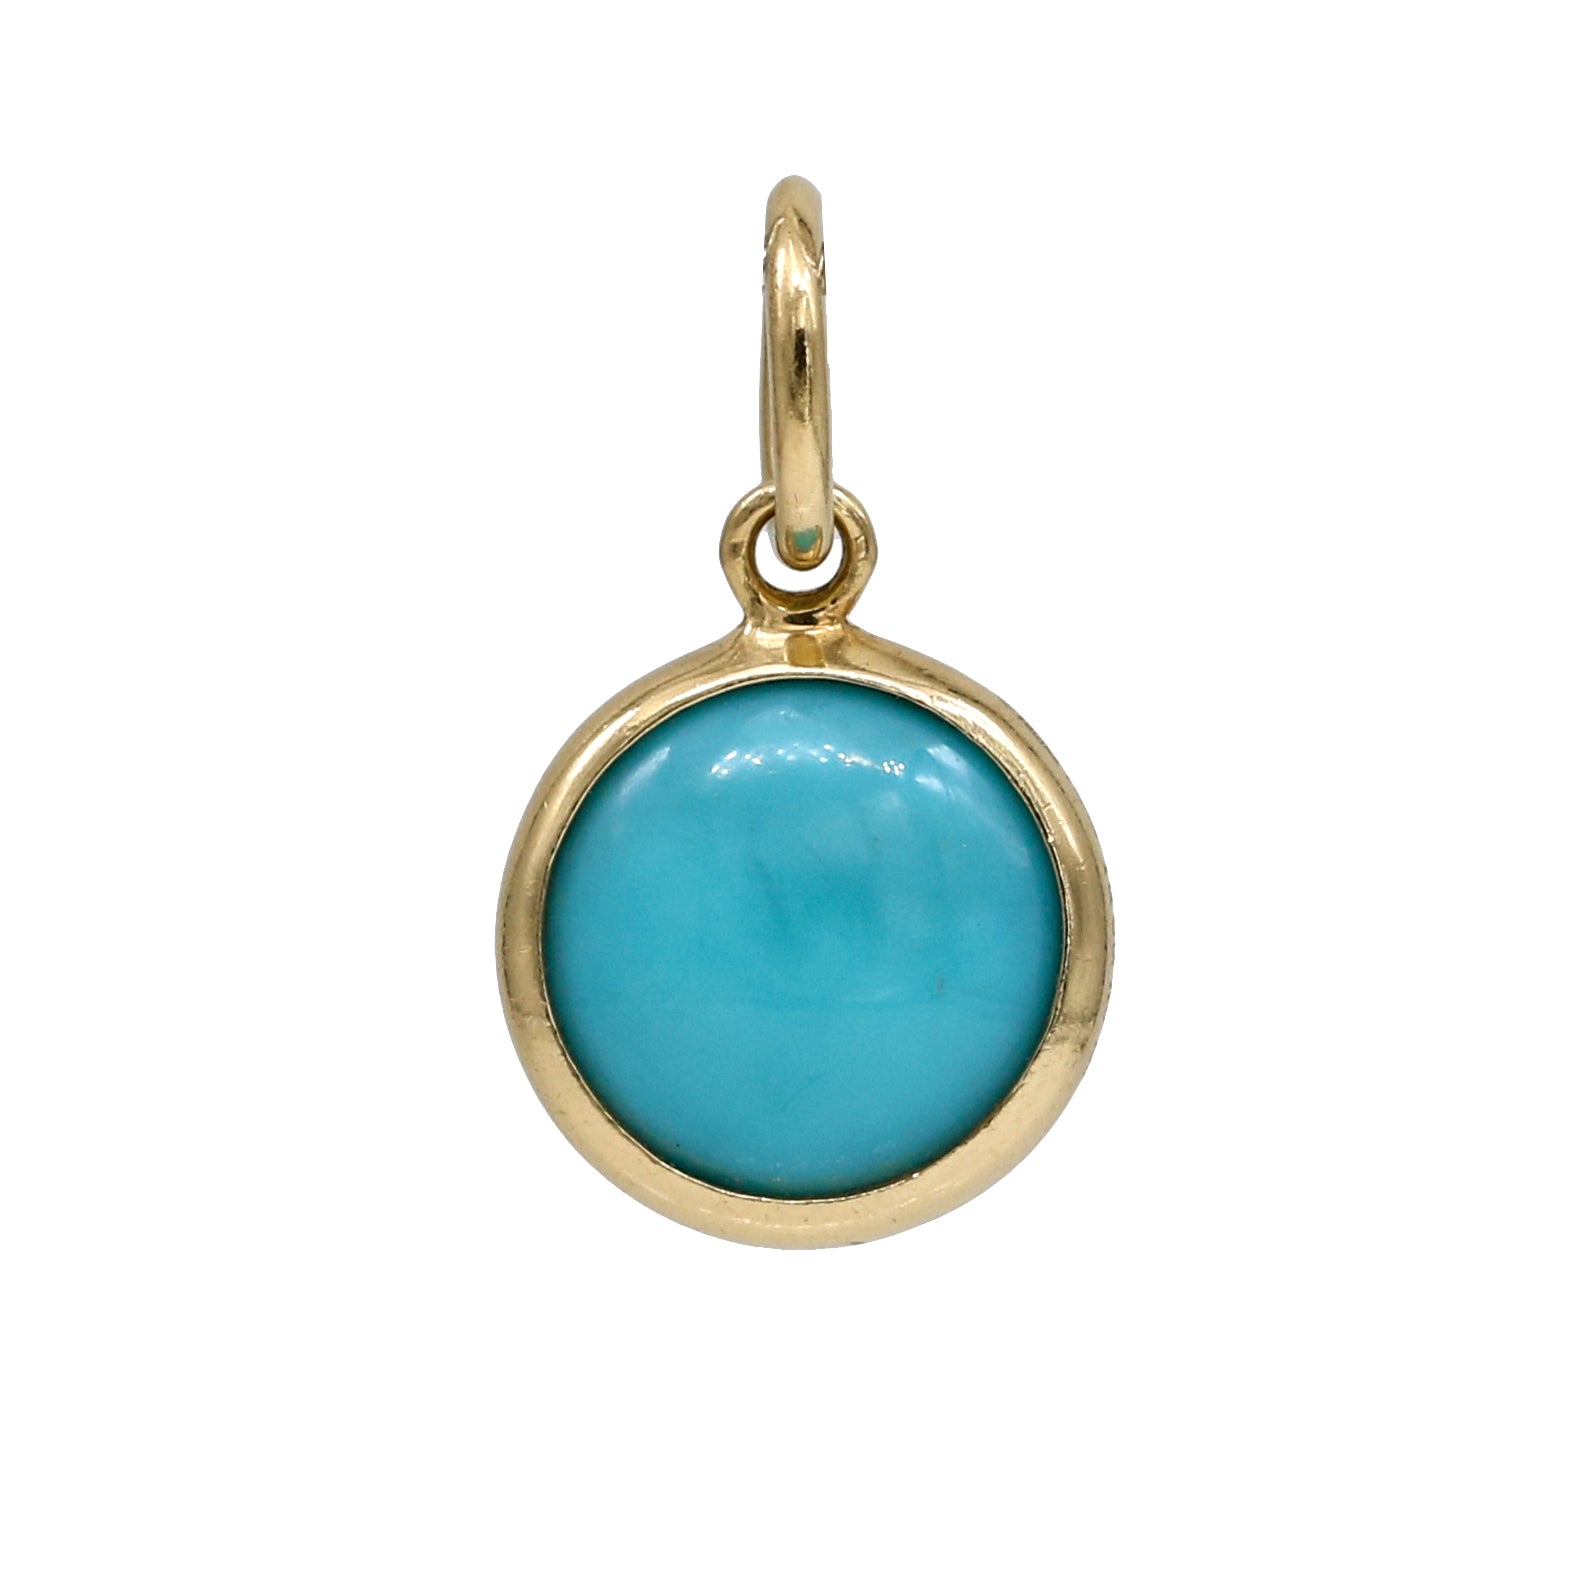 Tiffany & Co. Paloma Picasso Turquoise Dot Charm in 18k Yellow Gold